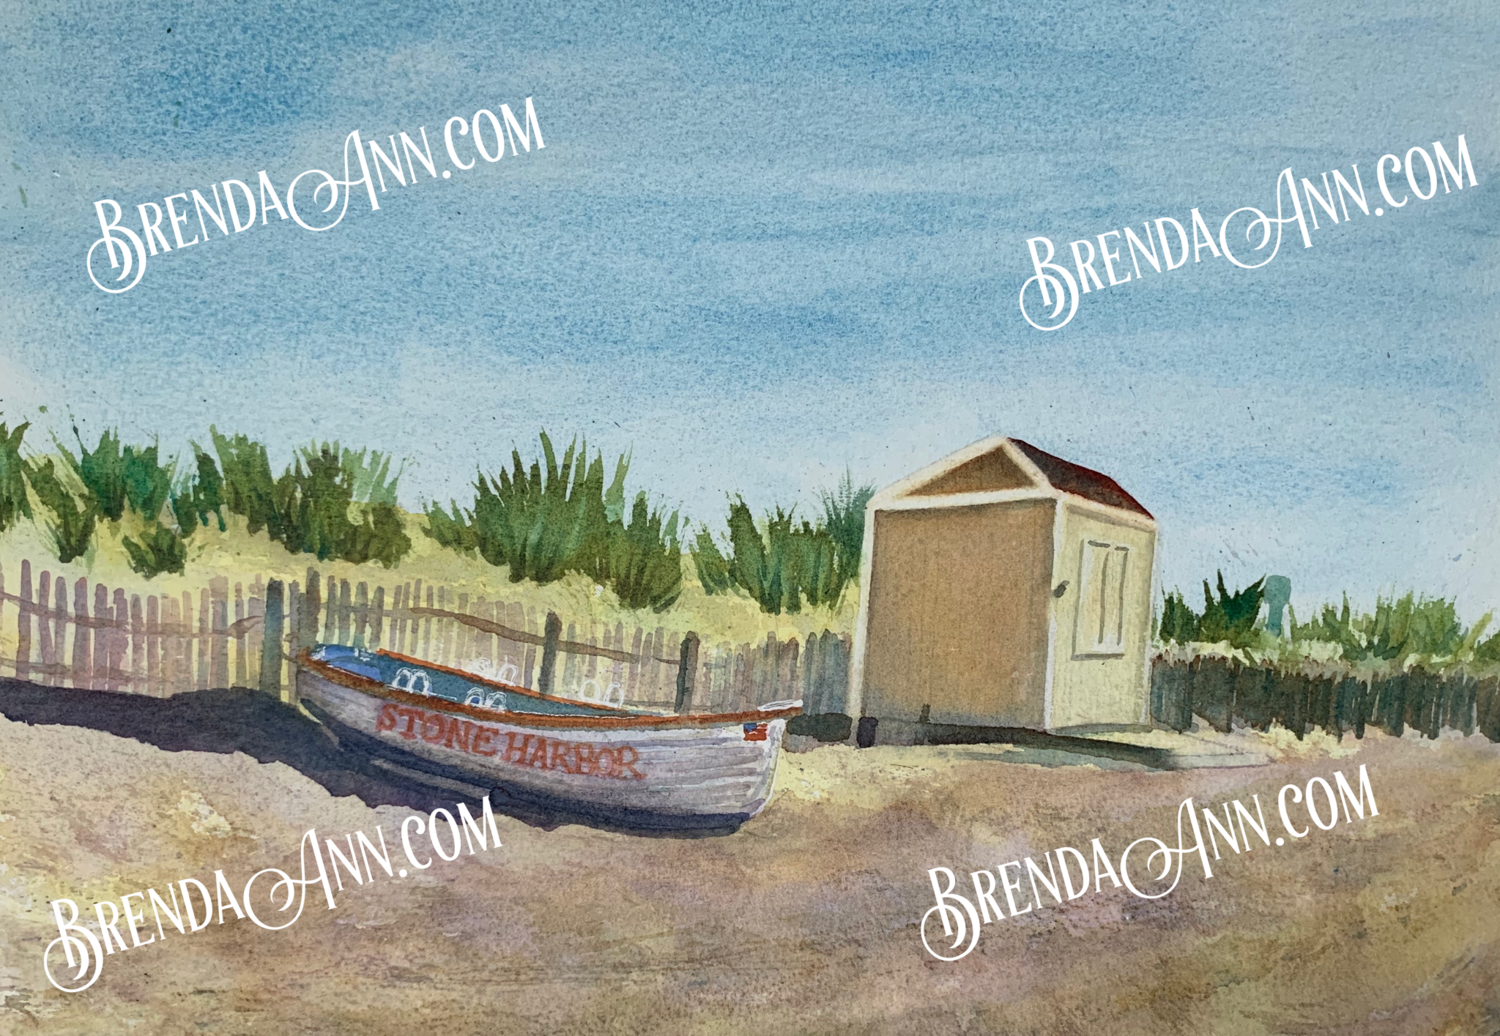 Lifeguard Boat on the Beach (Second Version) in Stone Harbor, NJ - Hand Signed Archival Watercolor Print